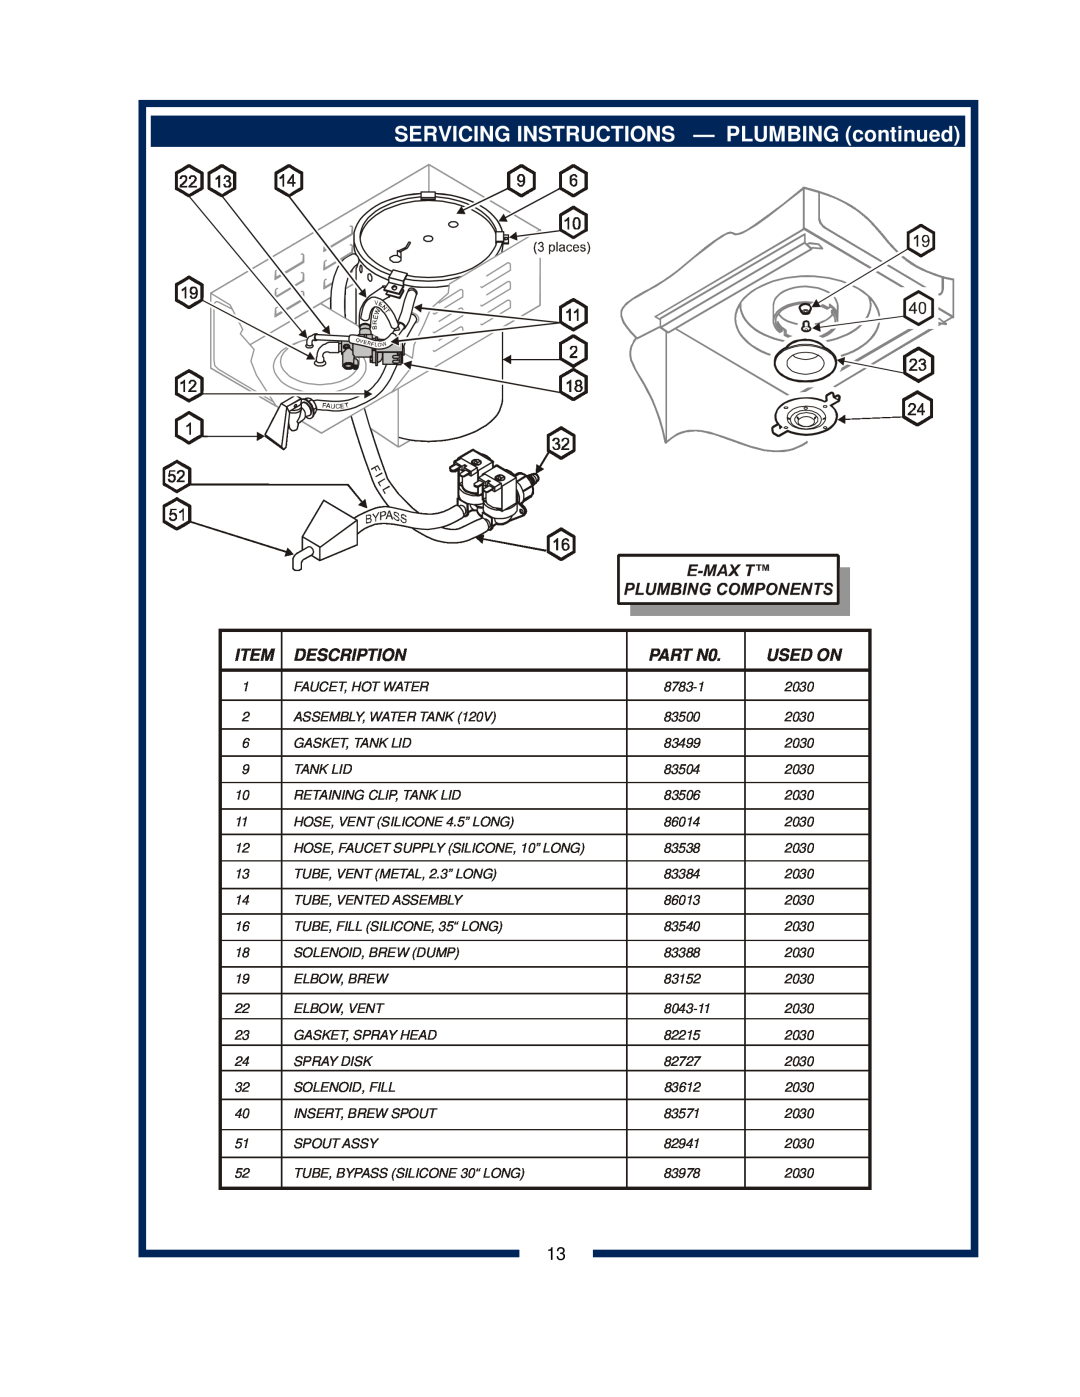 Bloomfield 2030 owner manual SERVICING INSTRUCTIONS - PLUMBING continued, Description, PART N0, Used On 